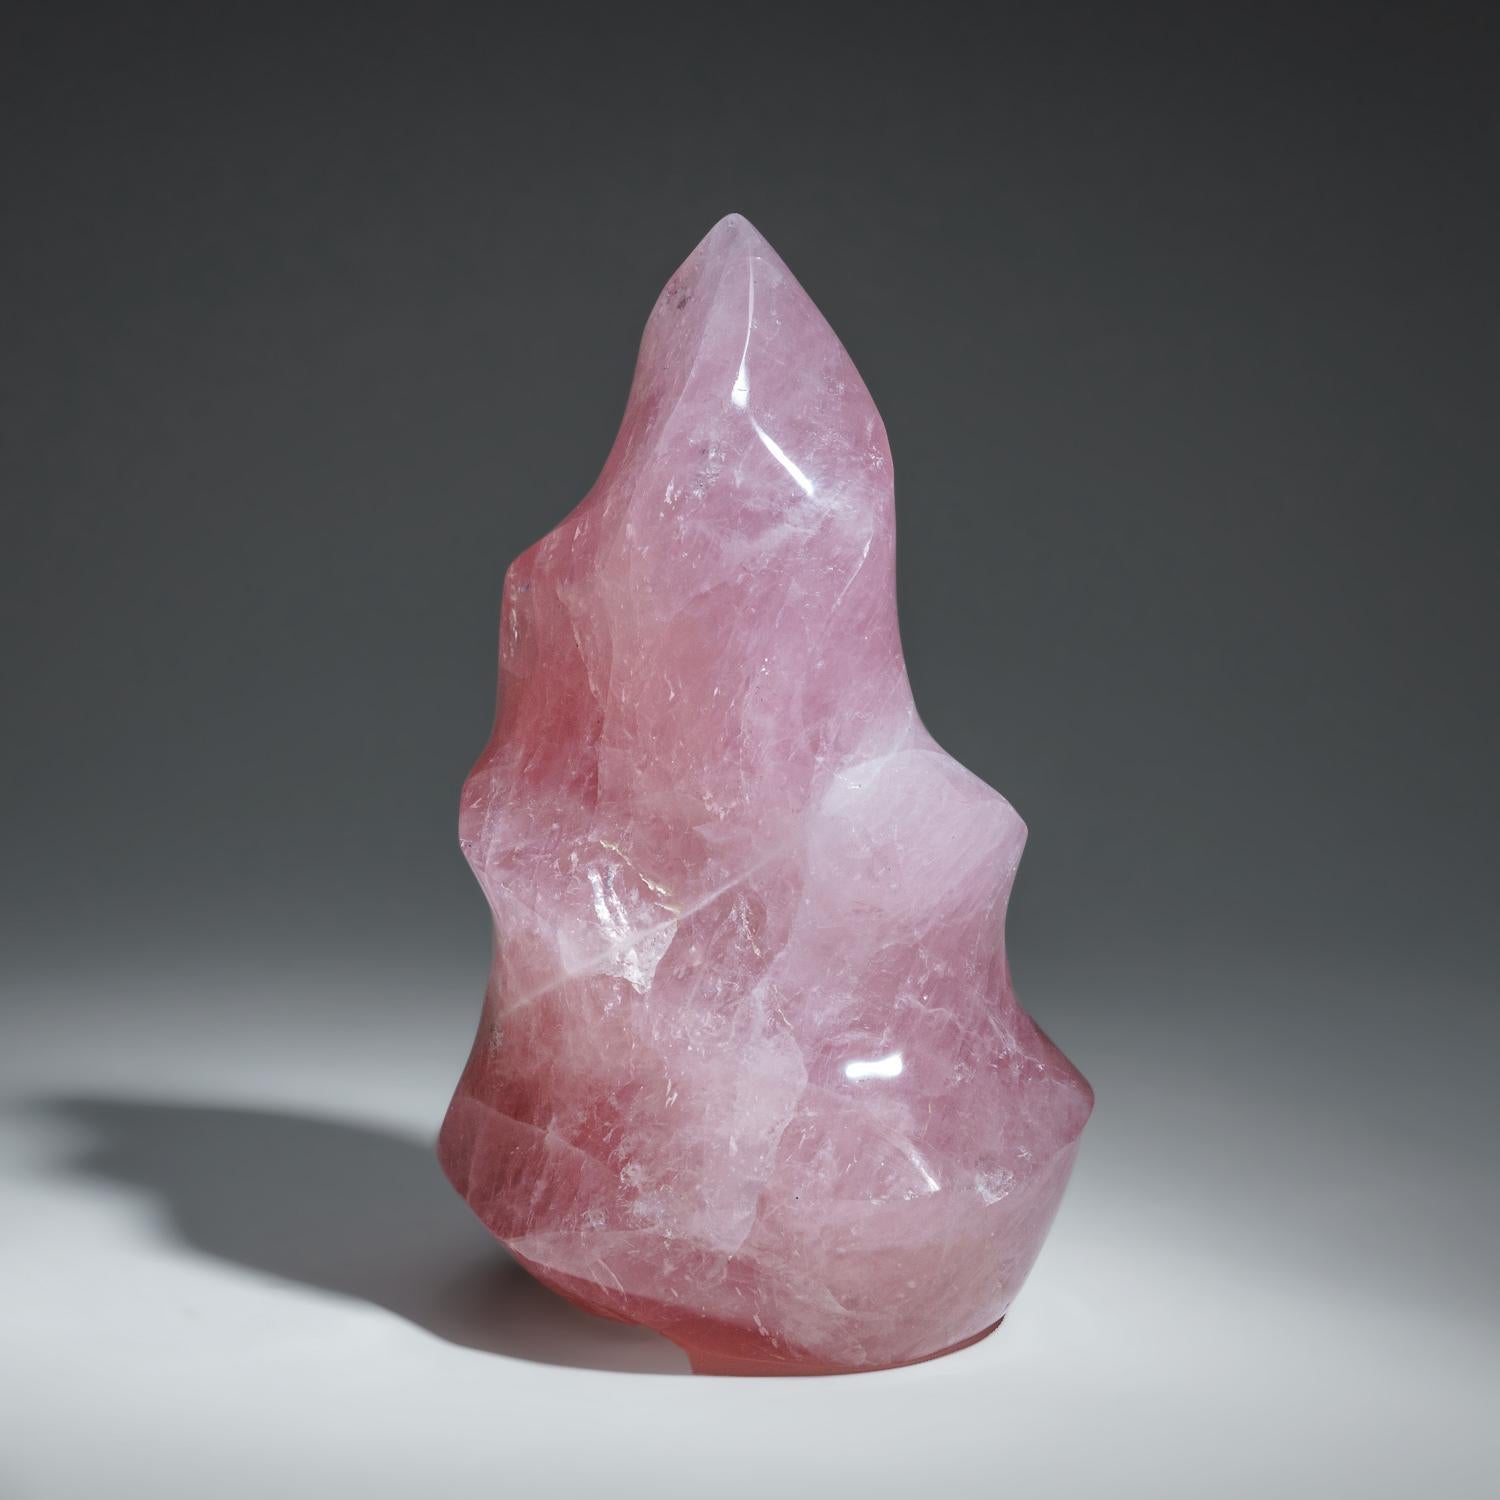 Contemporary Polished Rose Quartz Flame Freeform from Brazil, '8.5 Lbs' For Sale